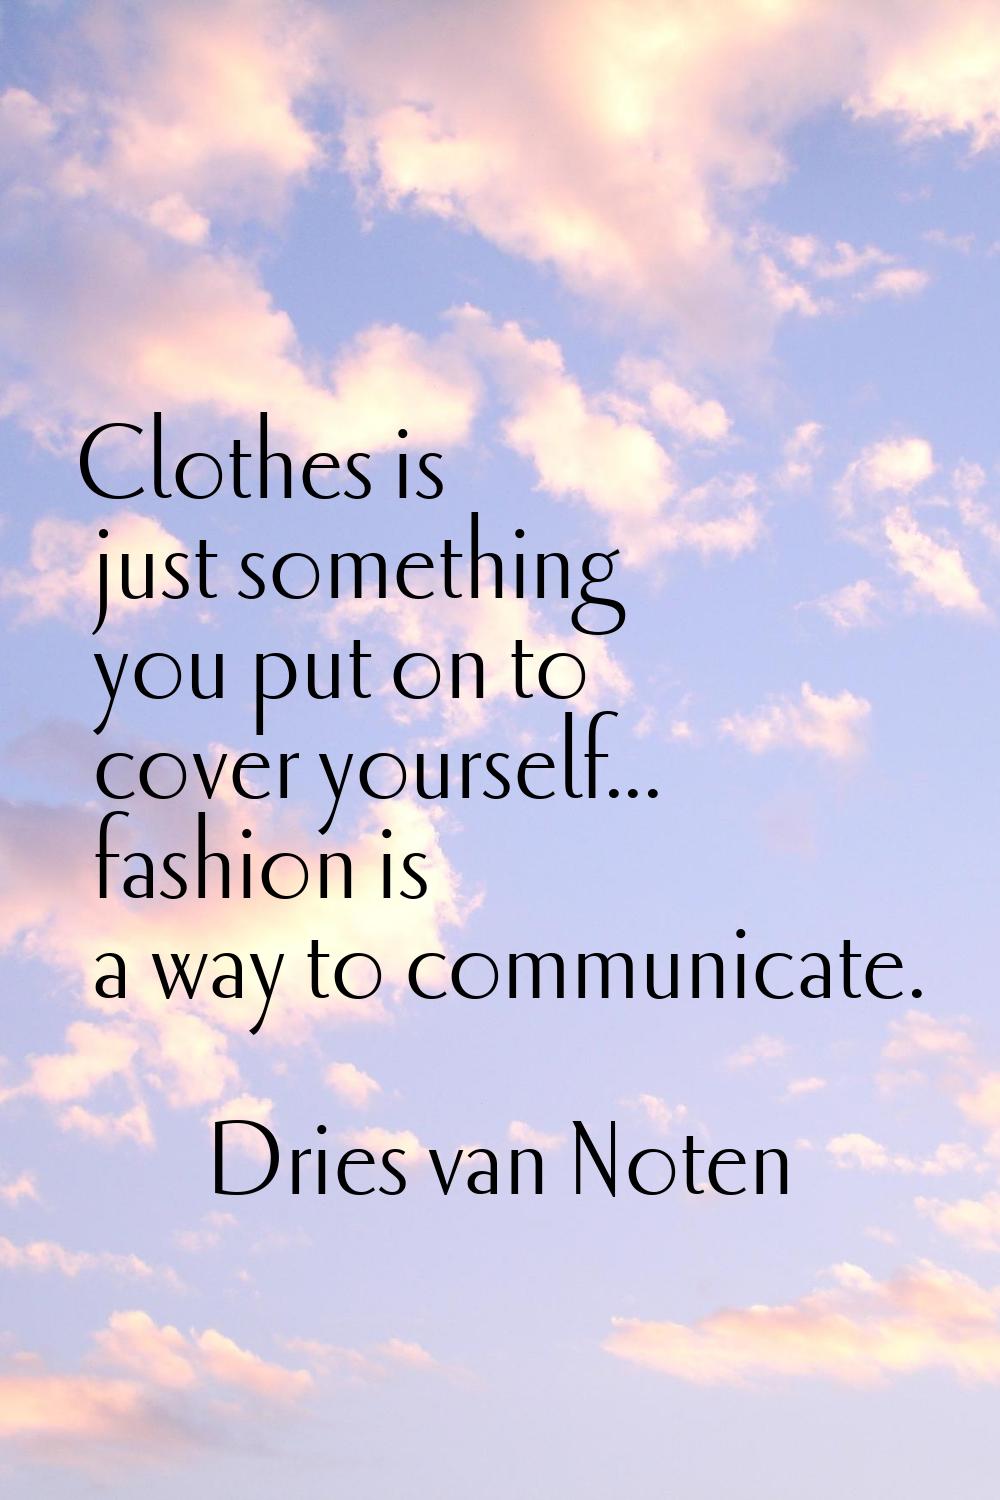 Clothes is just something you put on to cover yourself... fashion is a way to communicate.